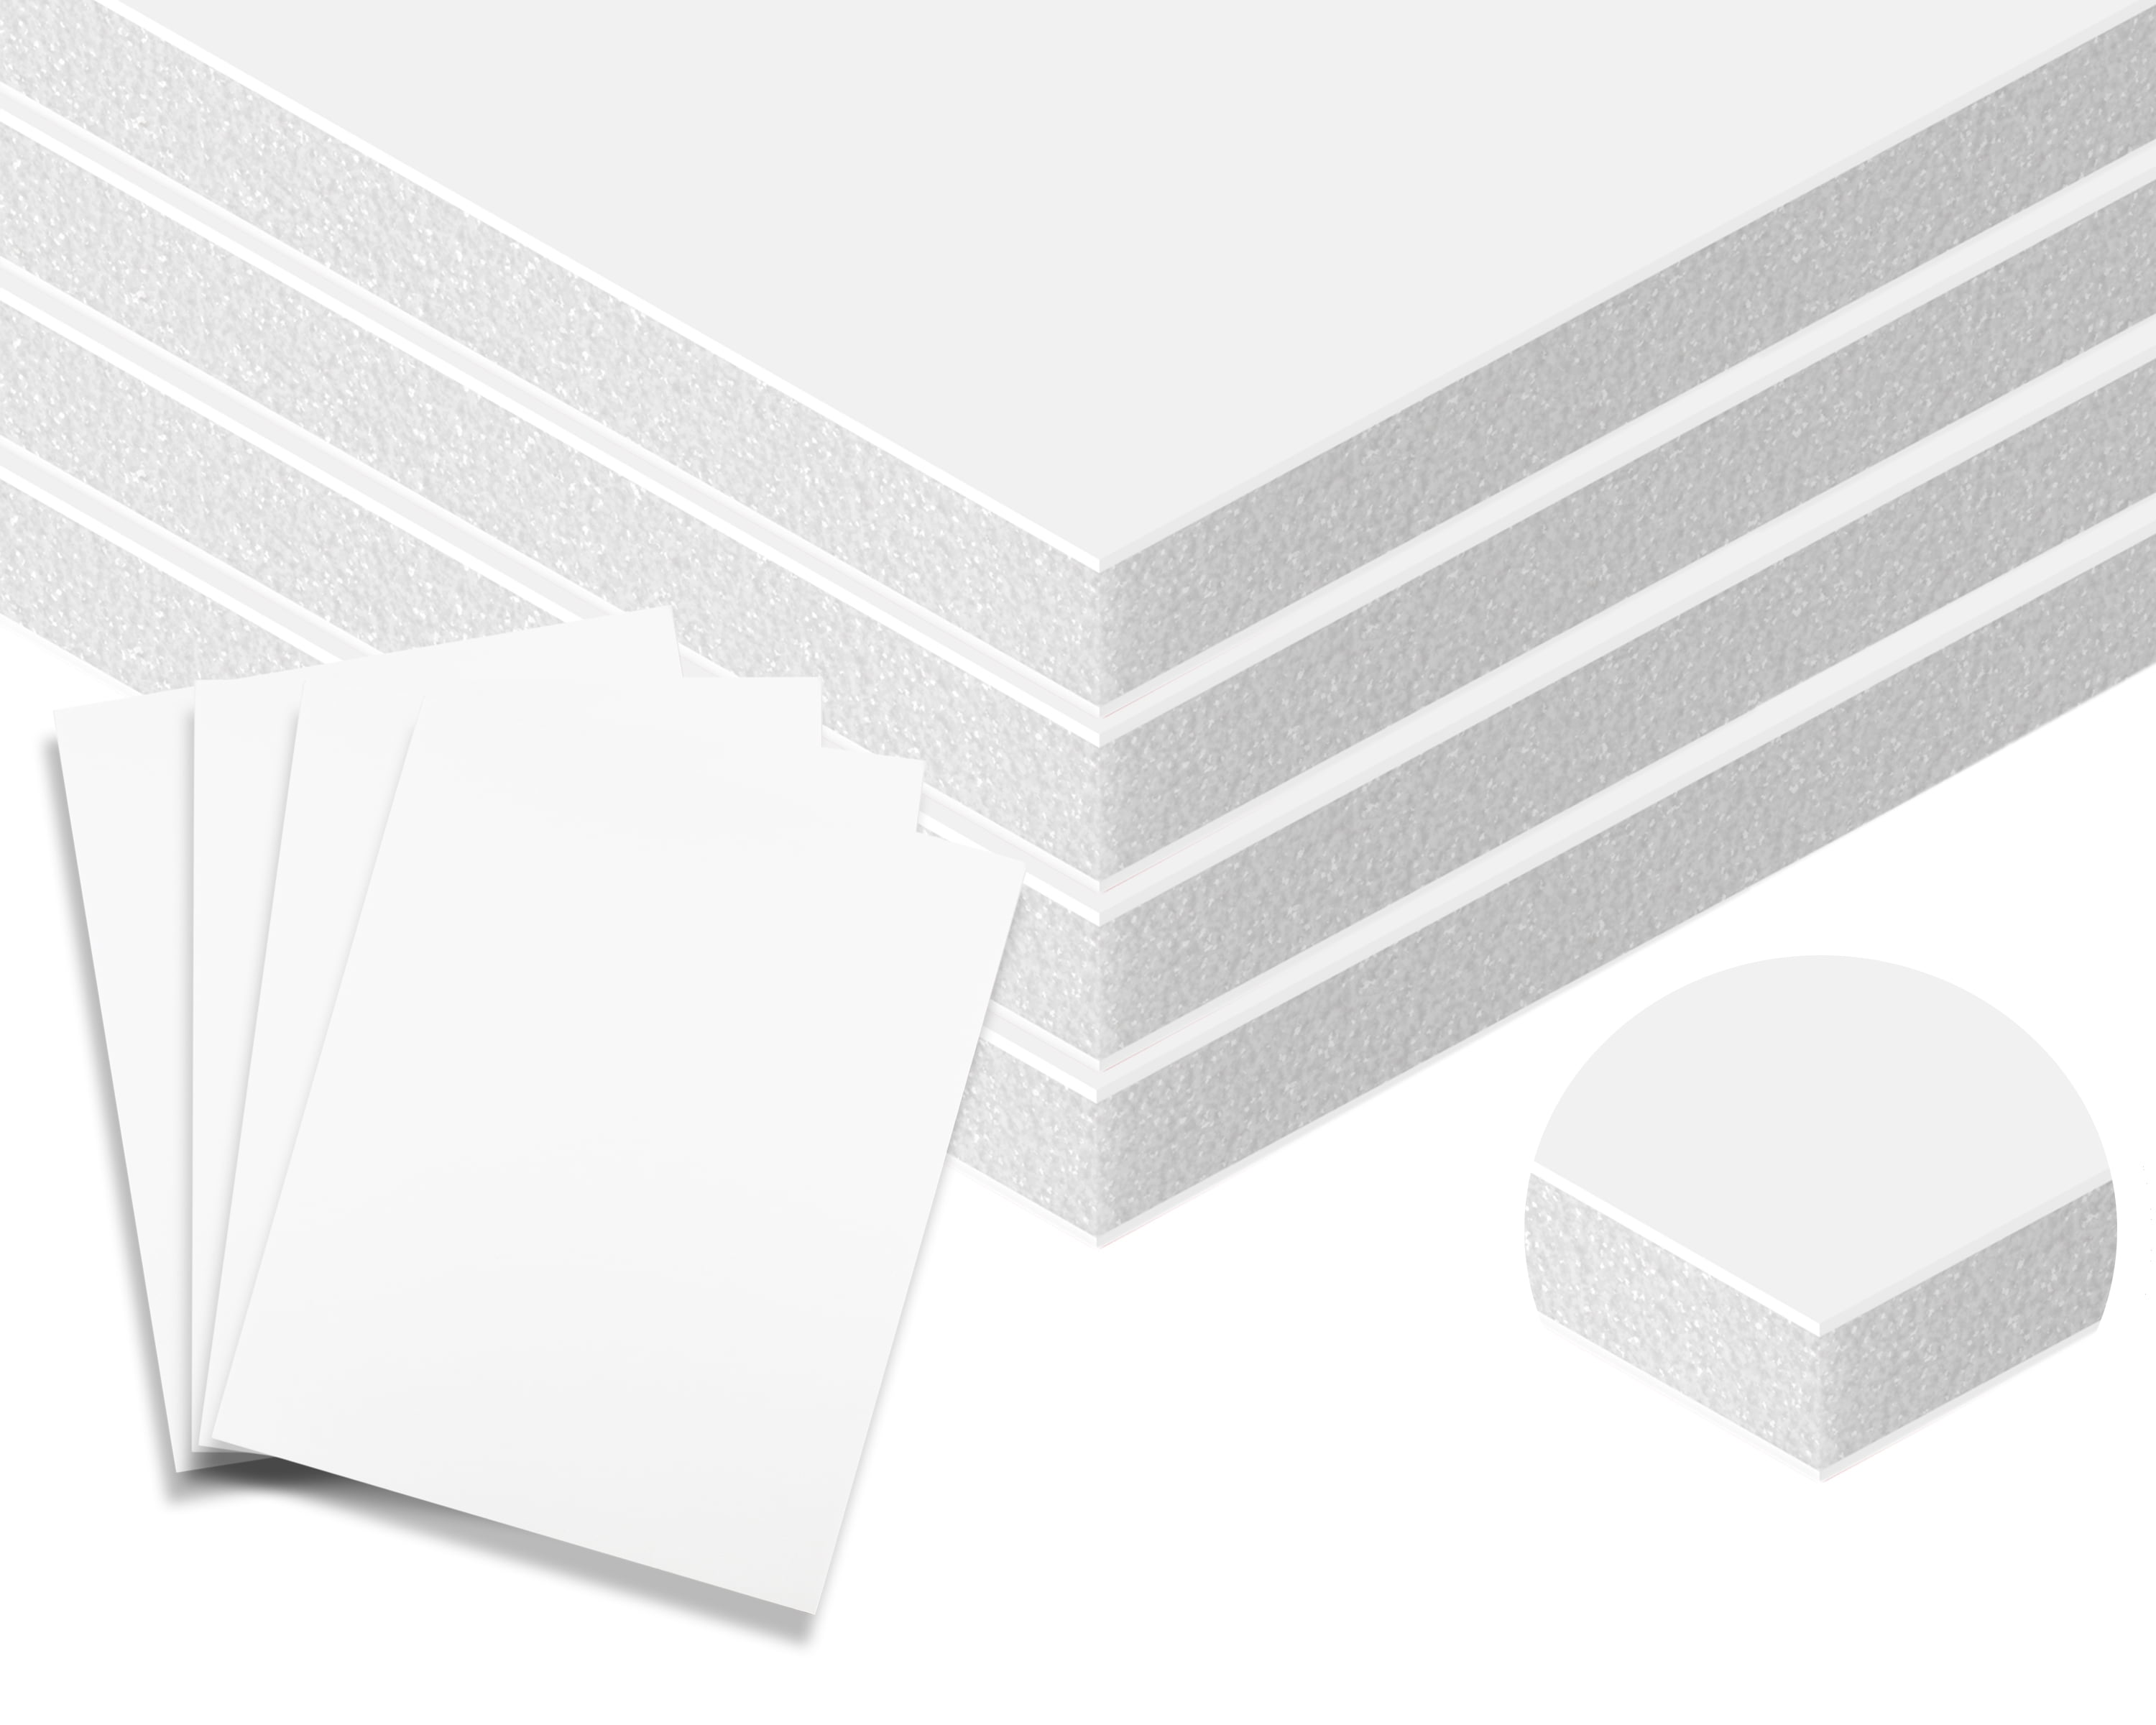 Foam Core Backing Board 3/8 White 24x36- 25 Pack. Many Sizes Available.  Acid Free Buffered Craft Poster Board for Signs, Presentations, School,  Office and Art Projects 